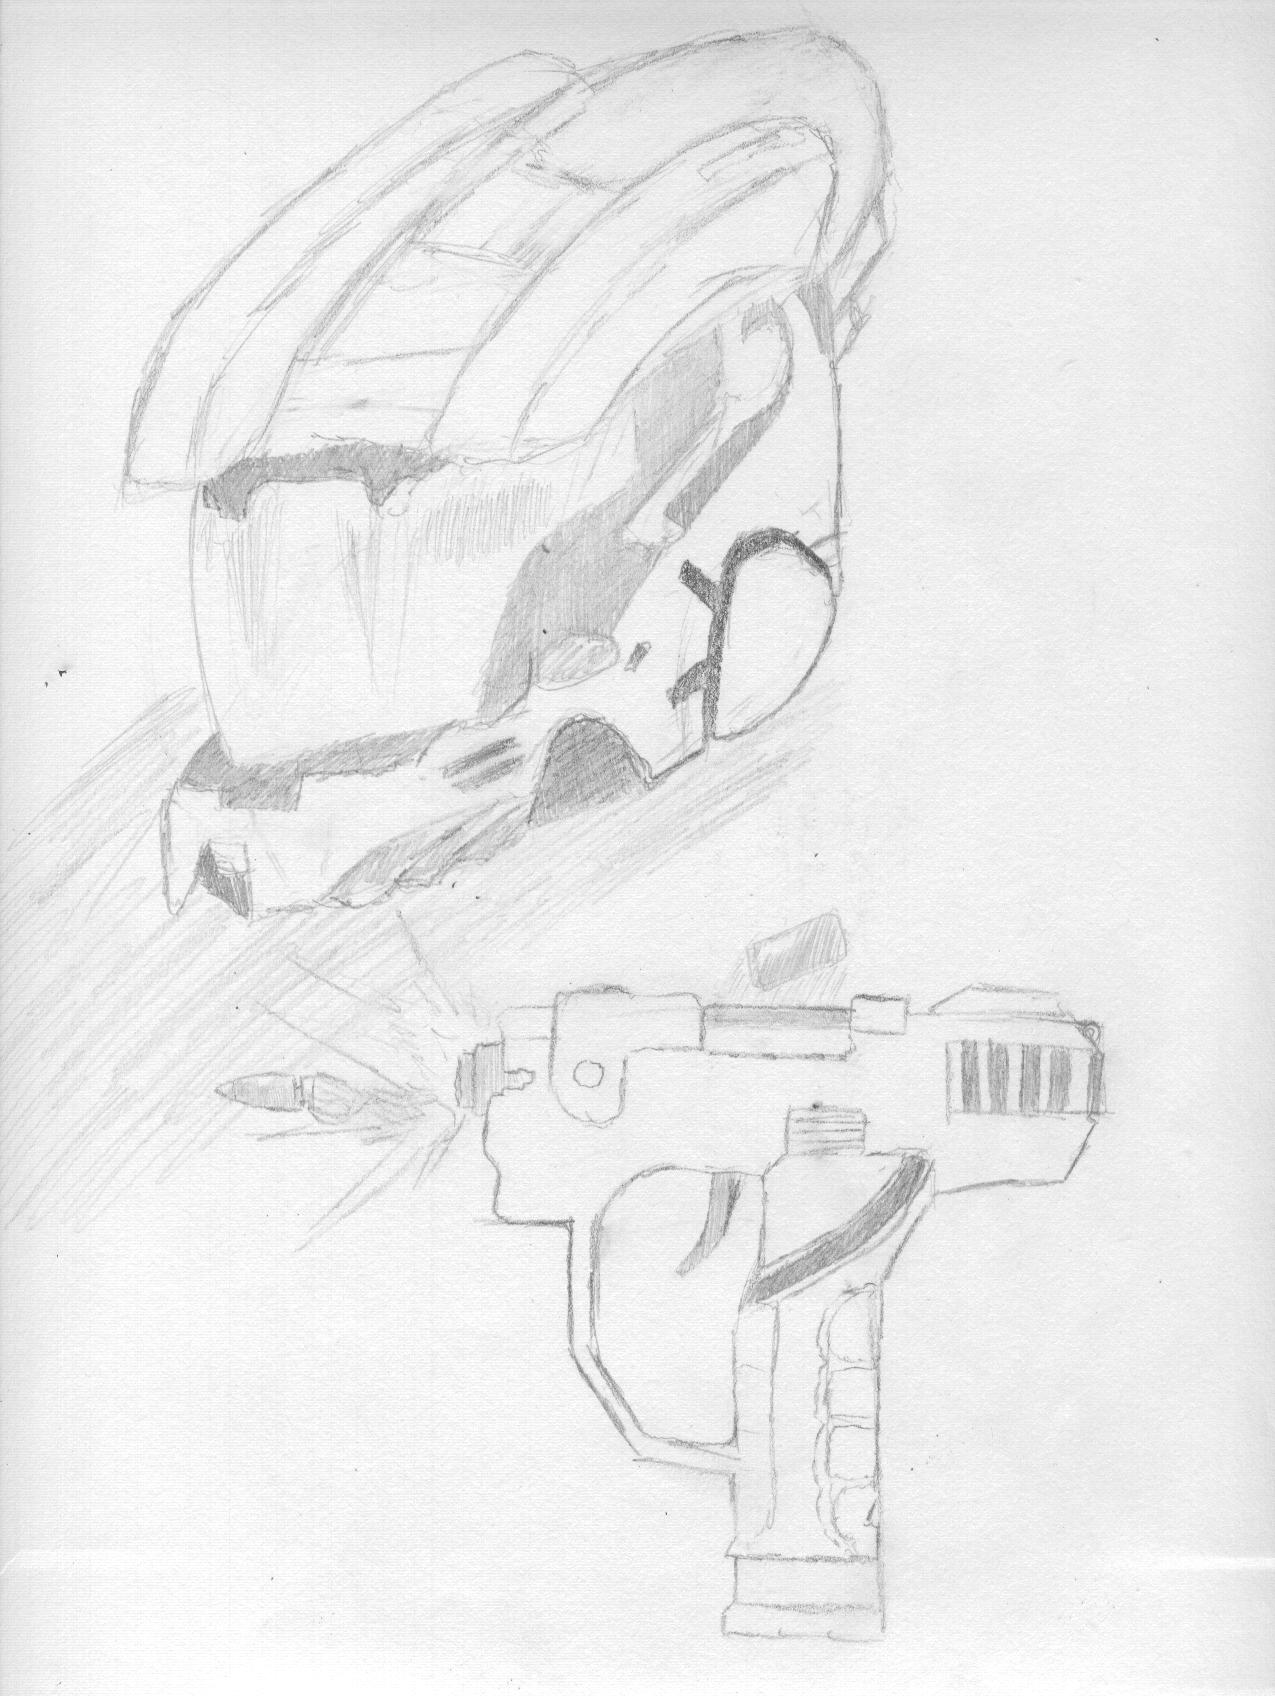 halo old by SPAWN1000